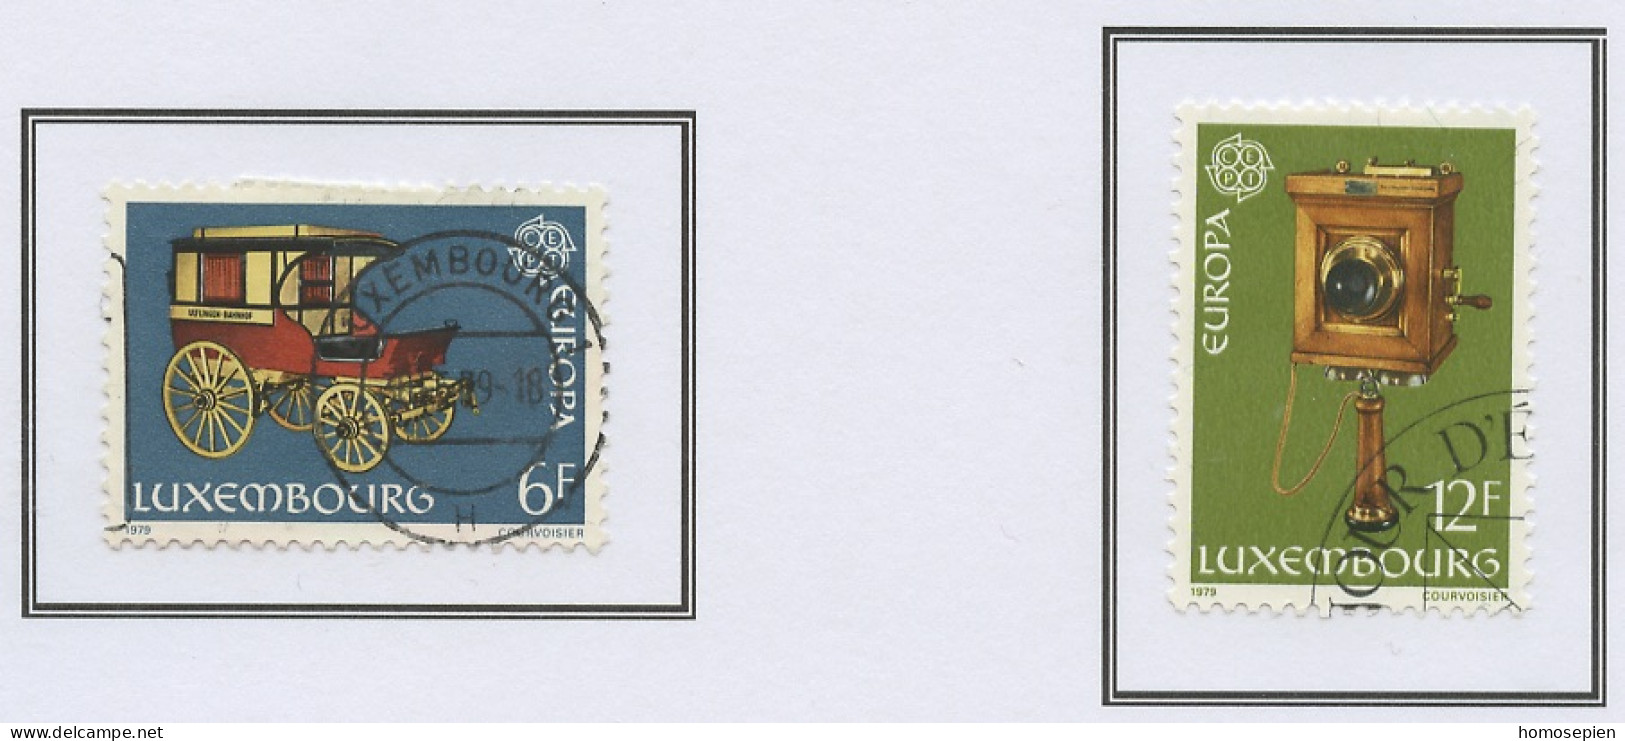 Luxembourg - Luxemburg 1979 Y&T N°937 à 938 - Michel N°987 à 988 (o) - EUROPA - Used Stamps